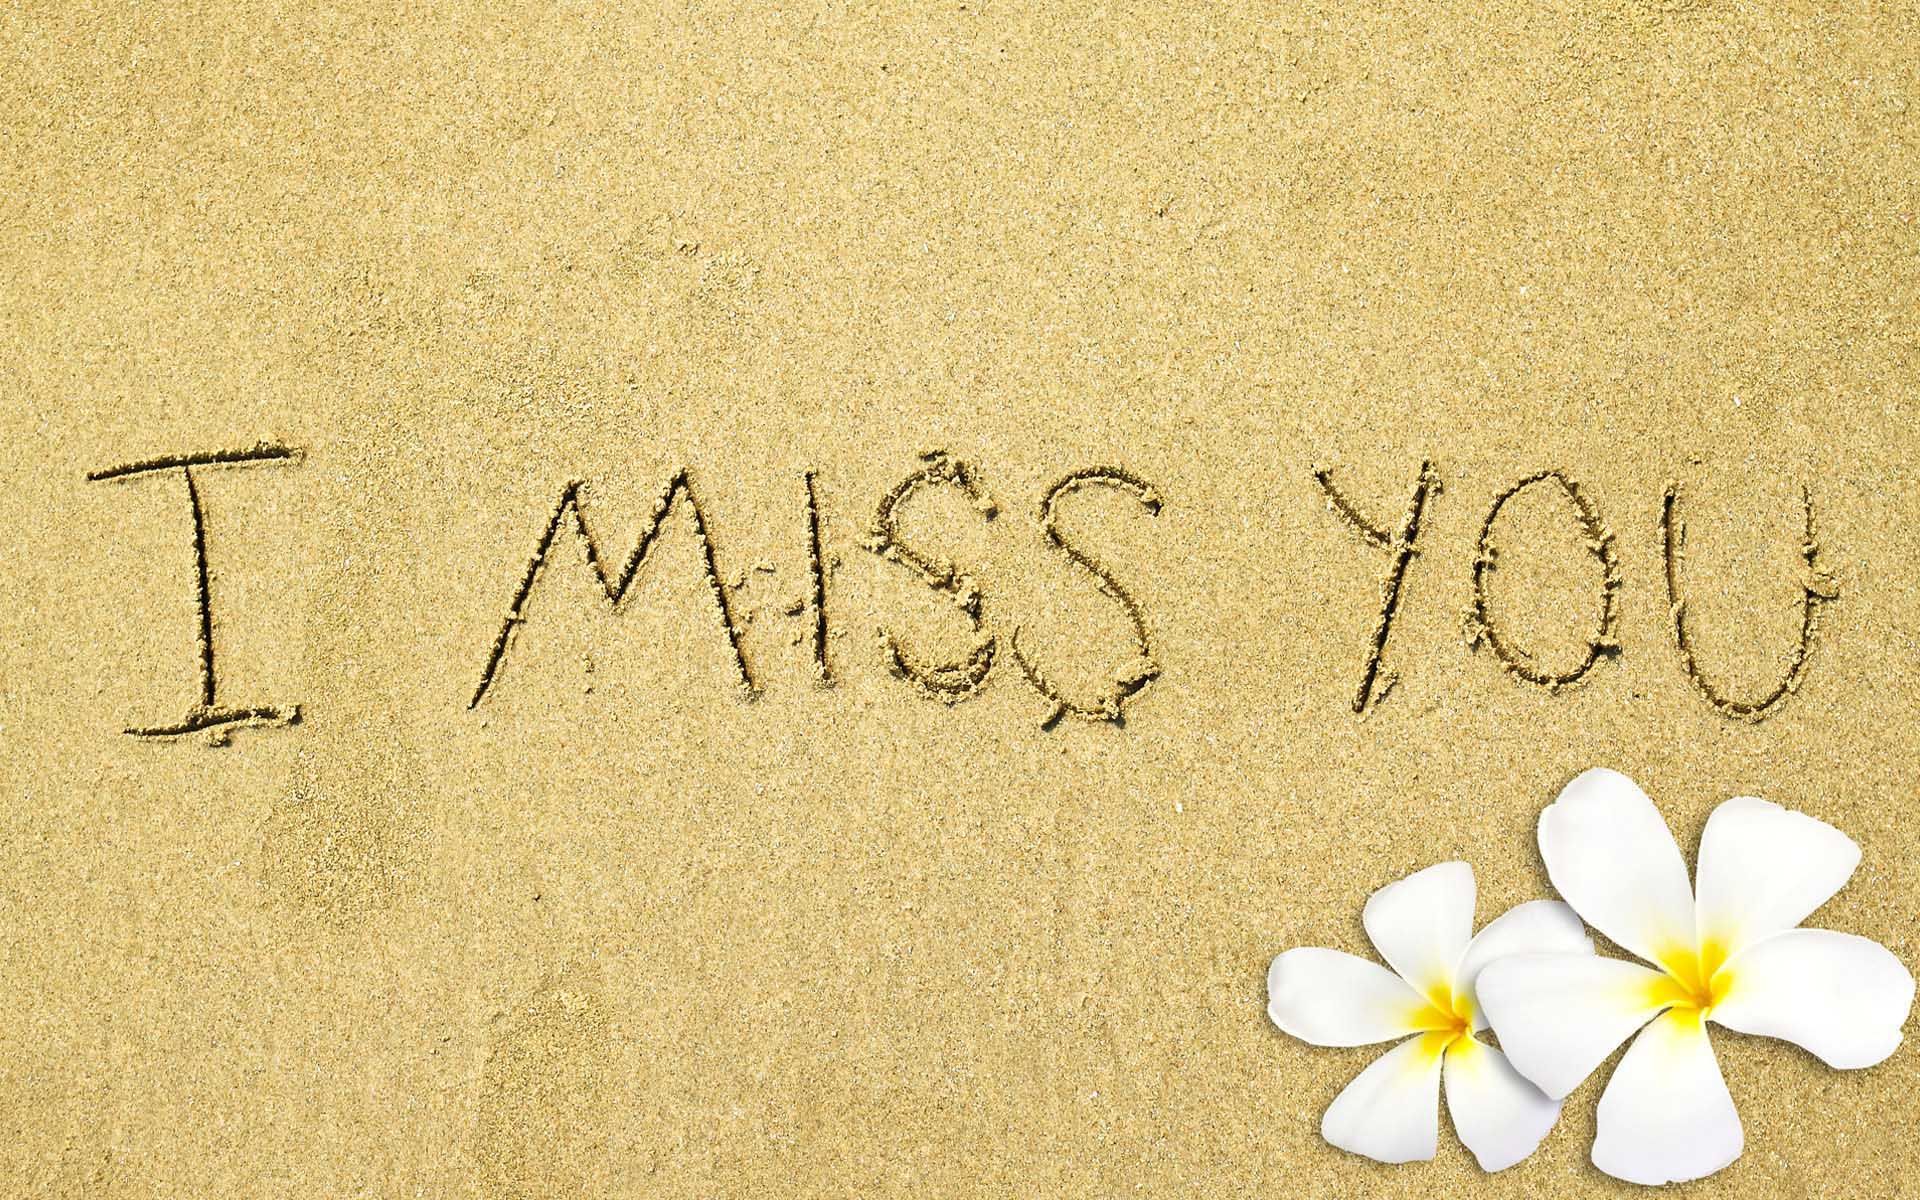 Miss You-sand And Flower Wallpaper - Writing In The Sand I Miss You - HD Wallpaper 